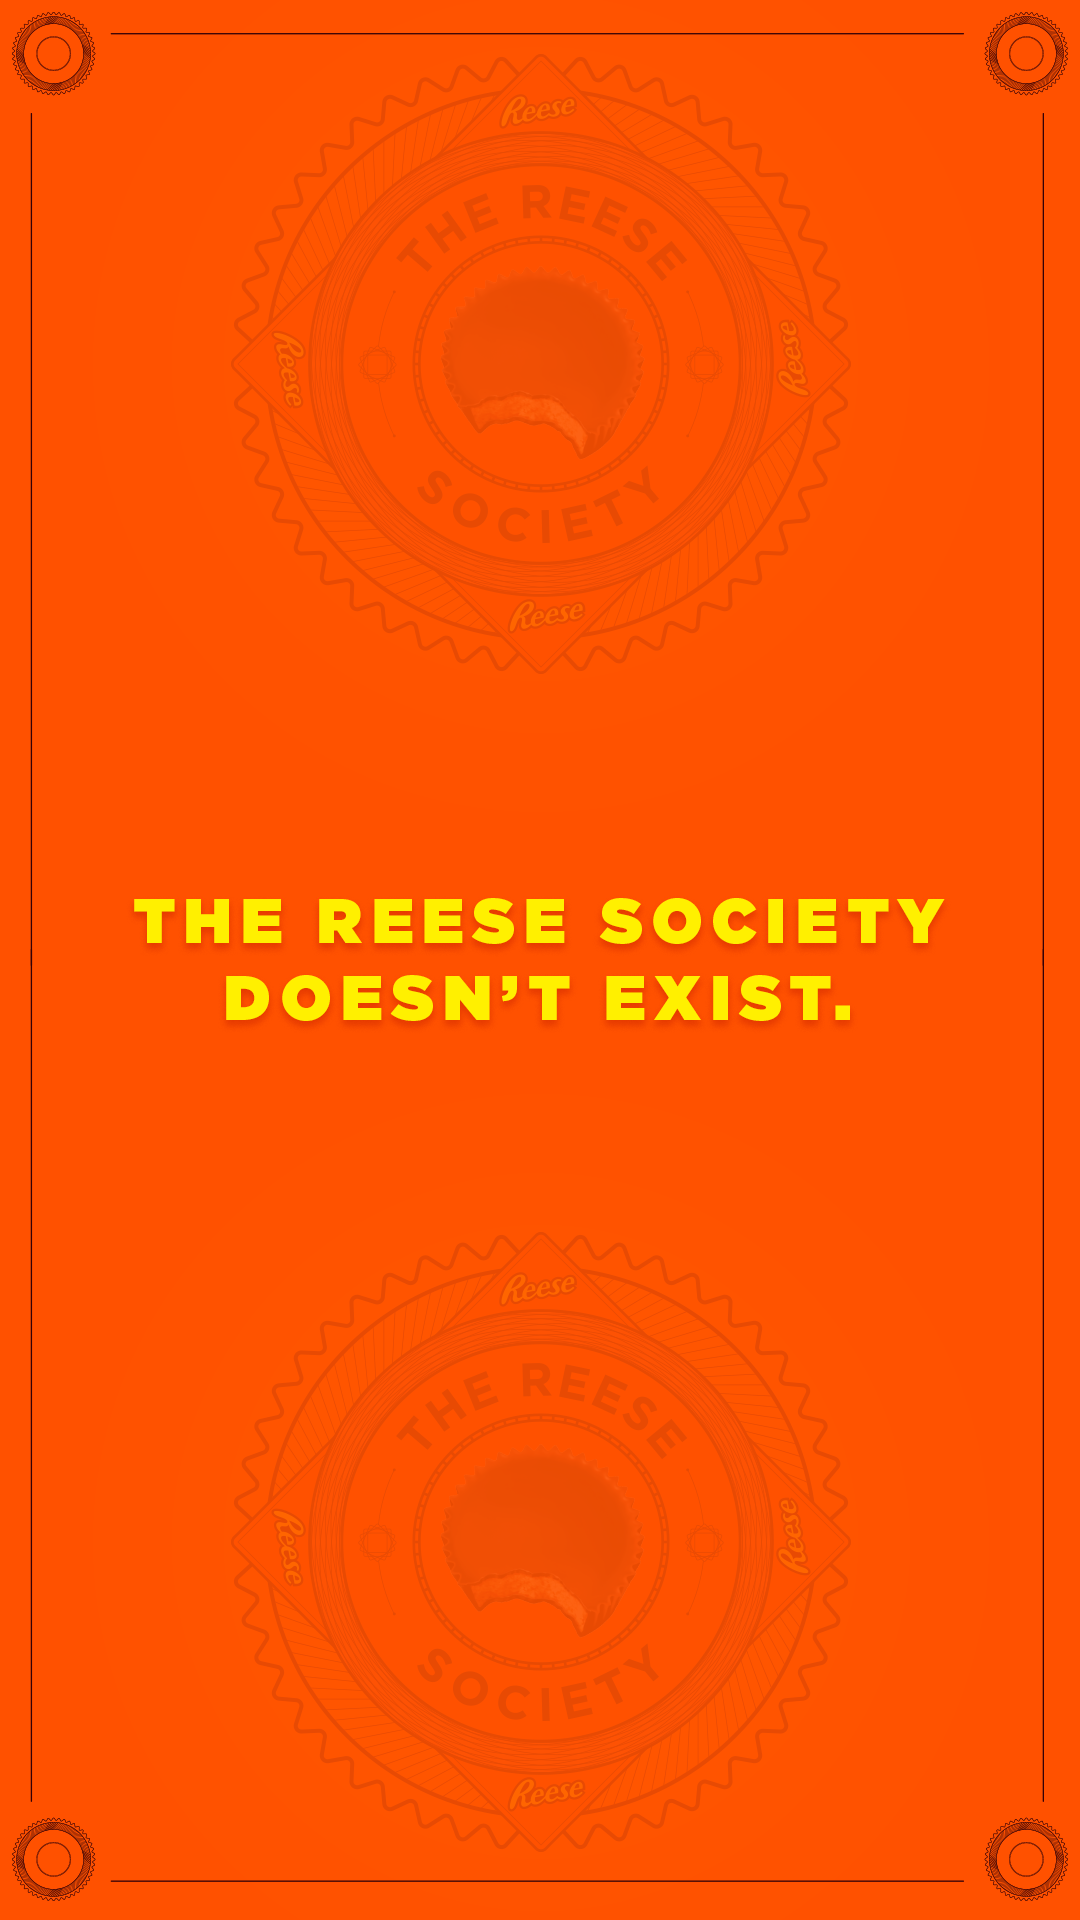 Reese-Society-IG_0082_The-Reese-Society-doesn’t-exist.png